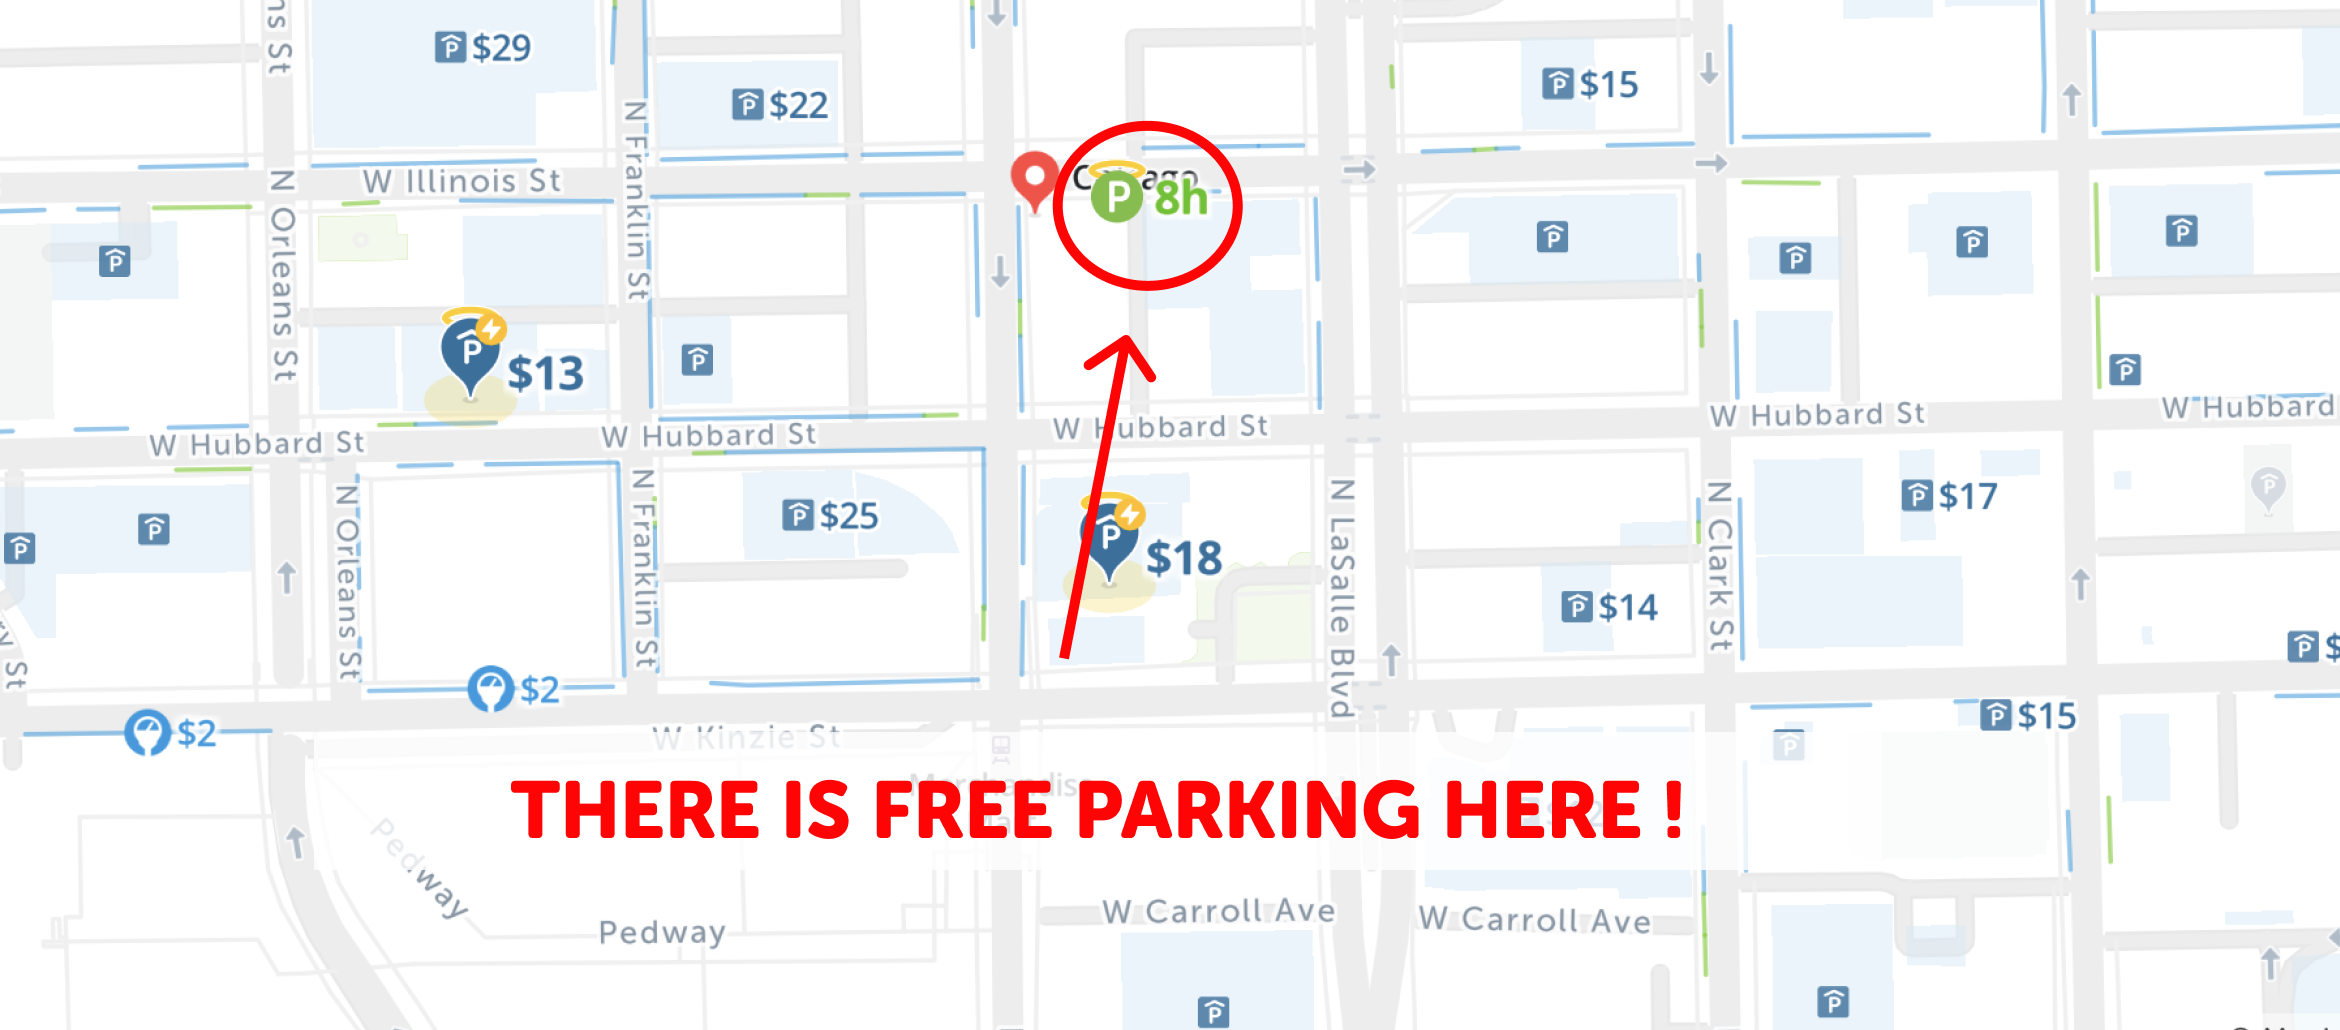 Finding Parking in the Chicago Loop When You're Renting